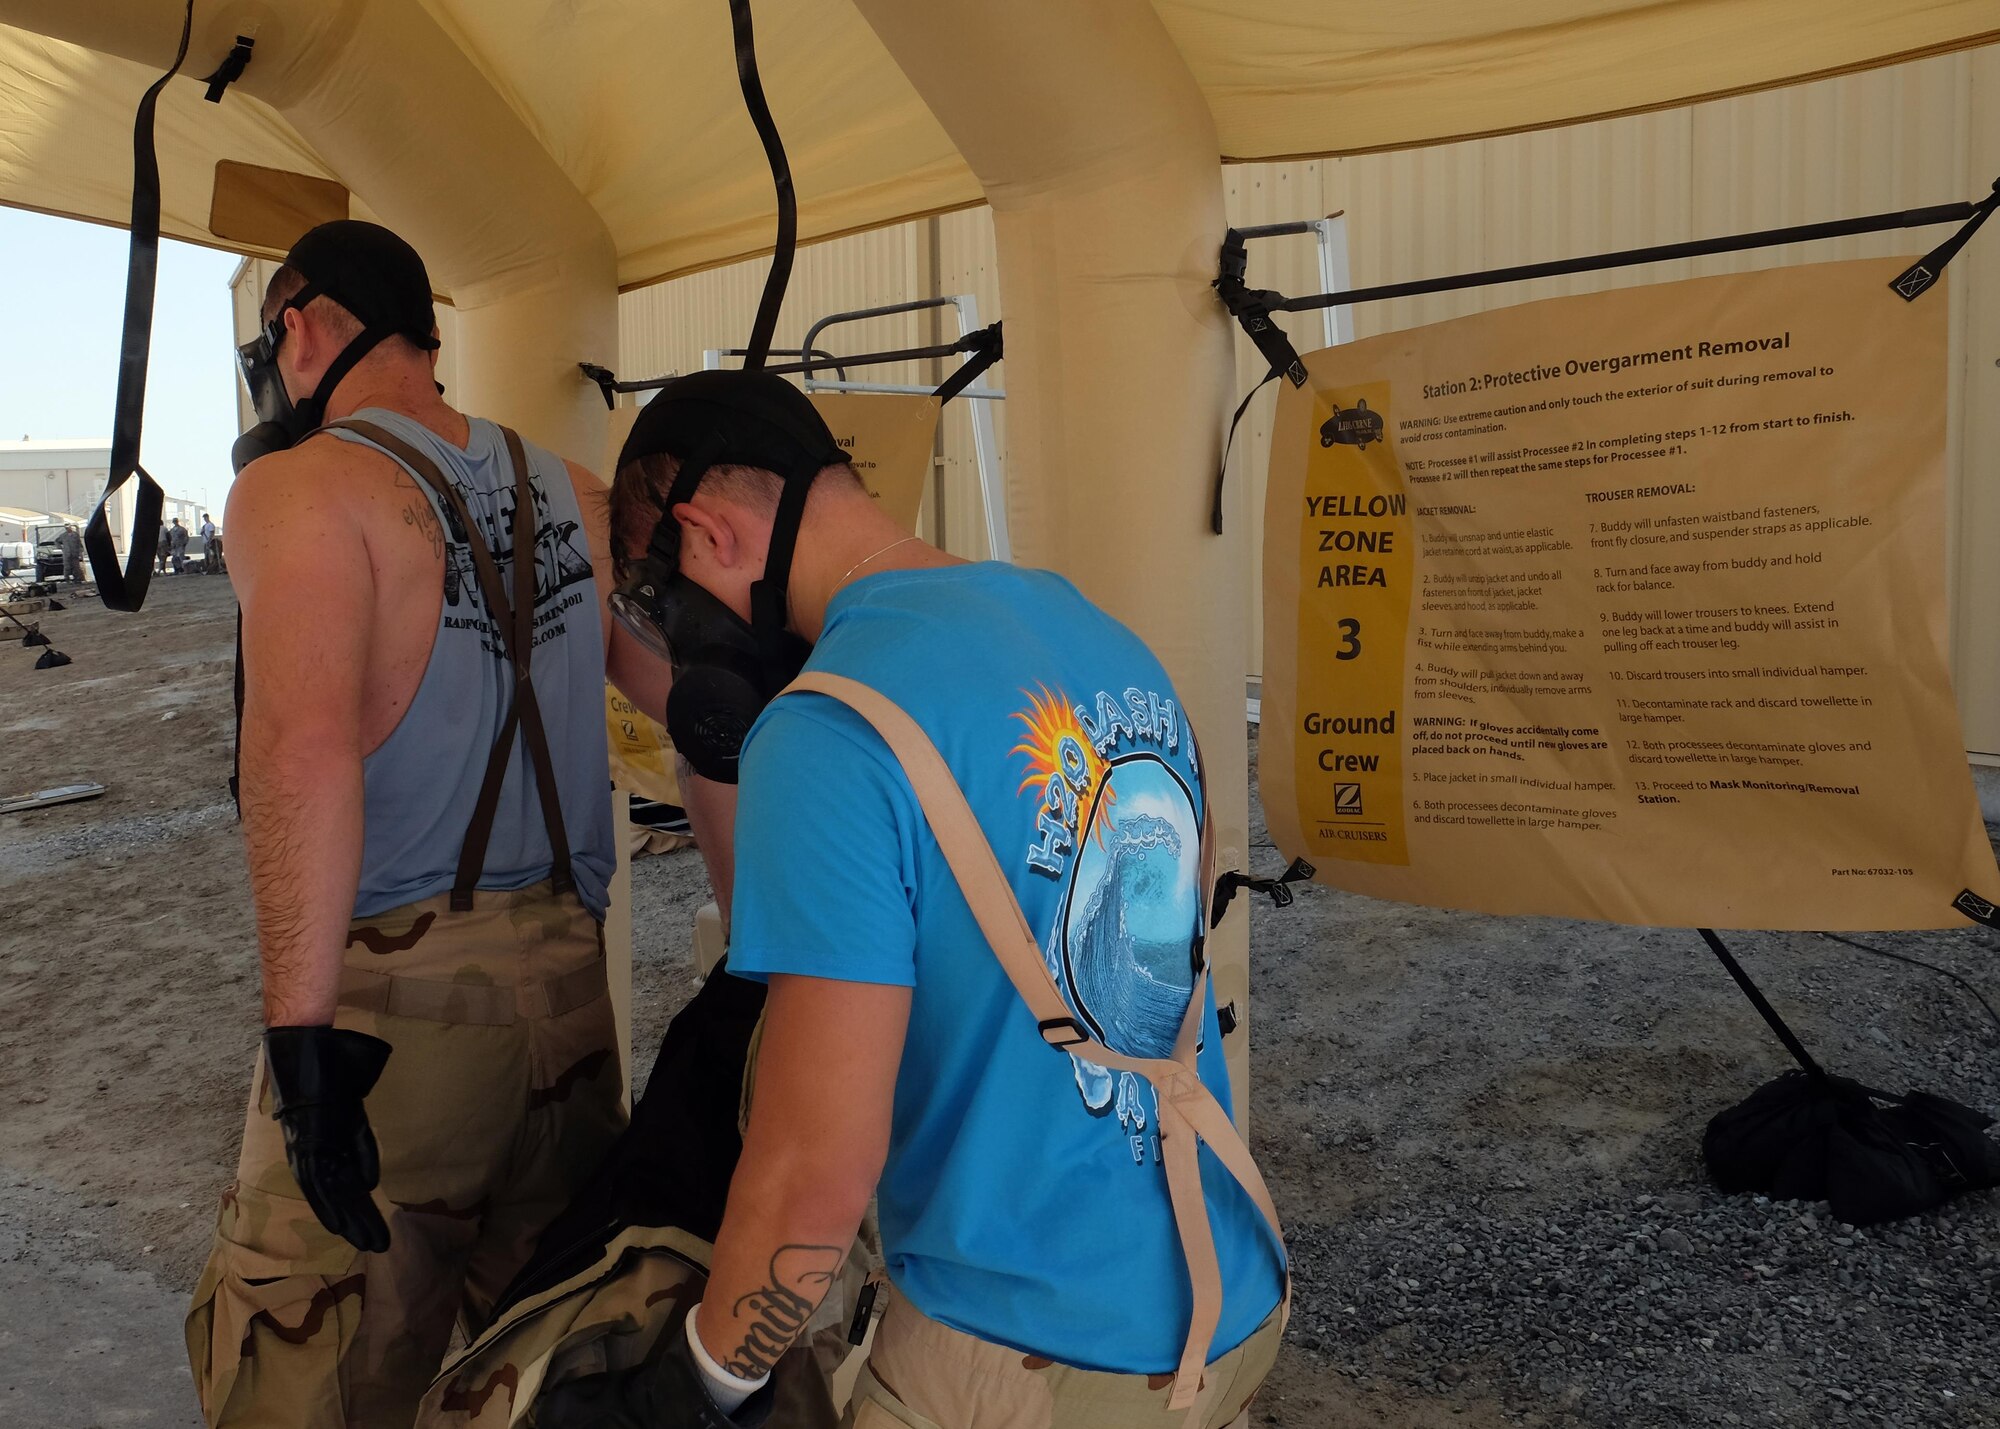 Airmen with the 380th Expeditionary Civil Engineer Squadron remove 'contaminated' personal protective equipment during Contamination Control Area training in a Lightweight Inflatable Decontamination System June 8, 2017, at an undisclosed location in southwest Asia. Airmen and Soldiers use a buddy system to ensure their skin doesn't come in contact with 'contaminated' equipment in the process. (U.S. Air Force photo by Senior Airman Preston Webb)